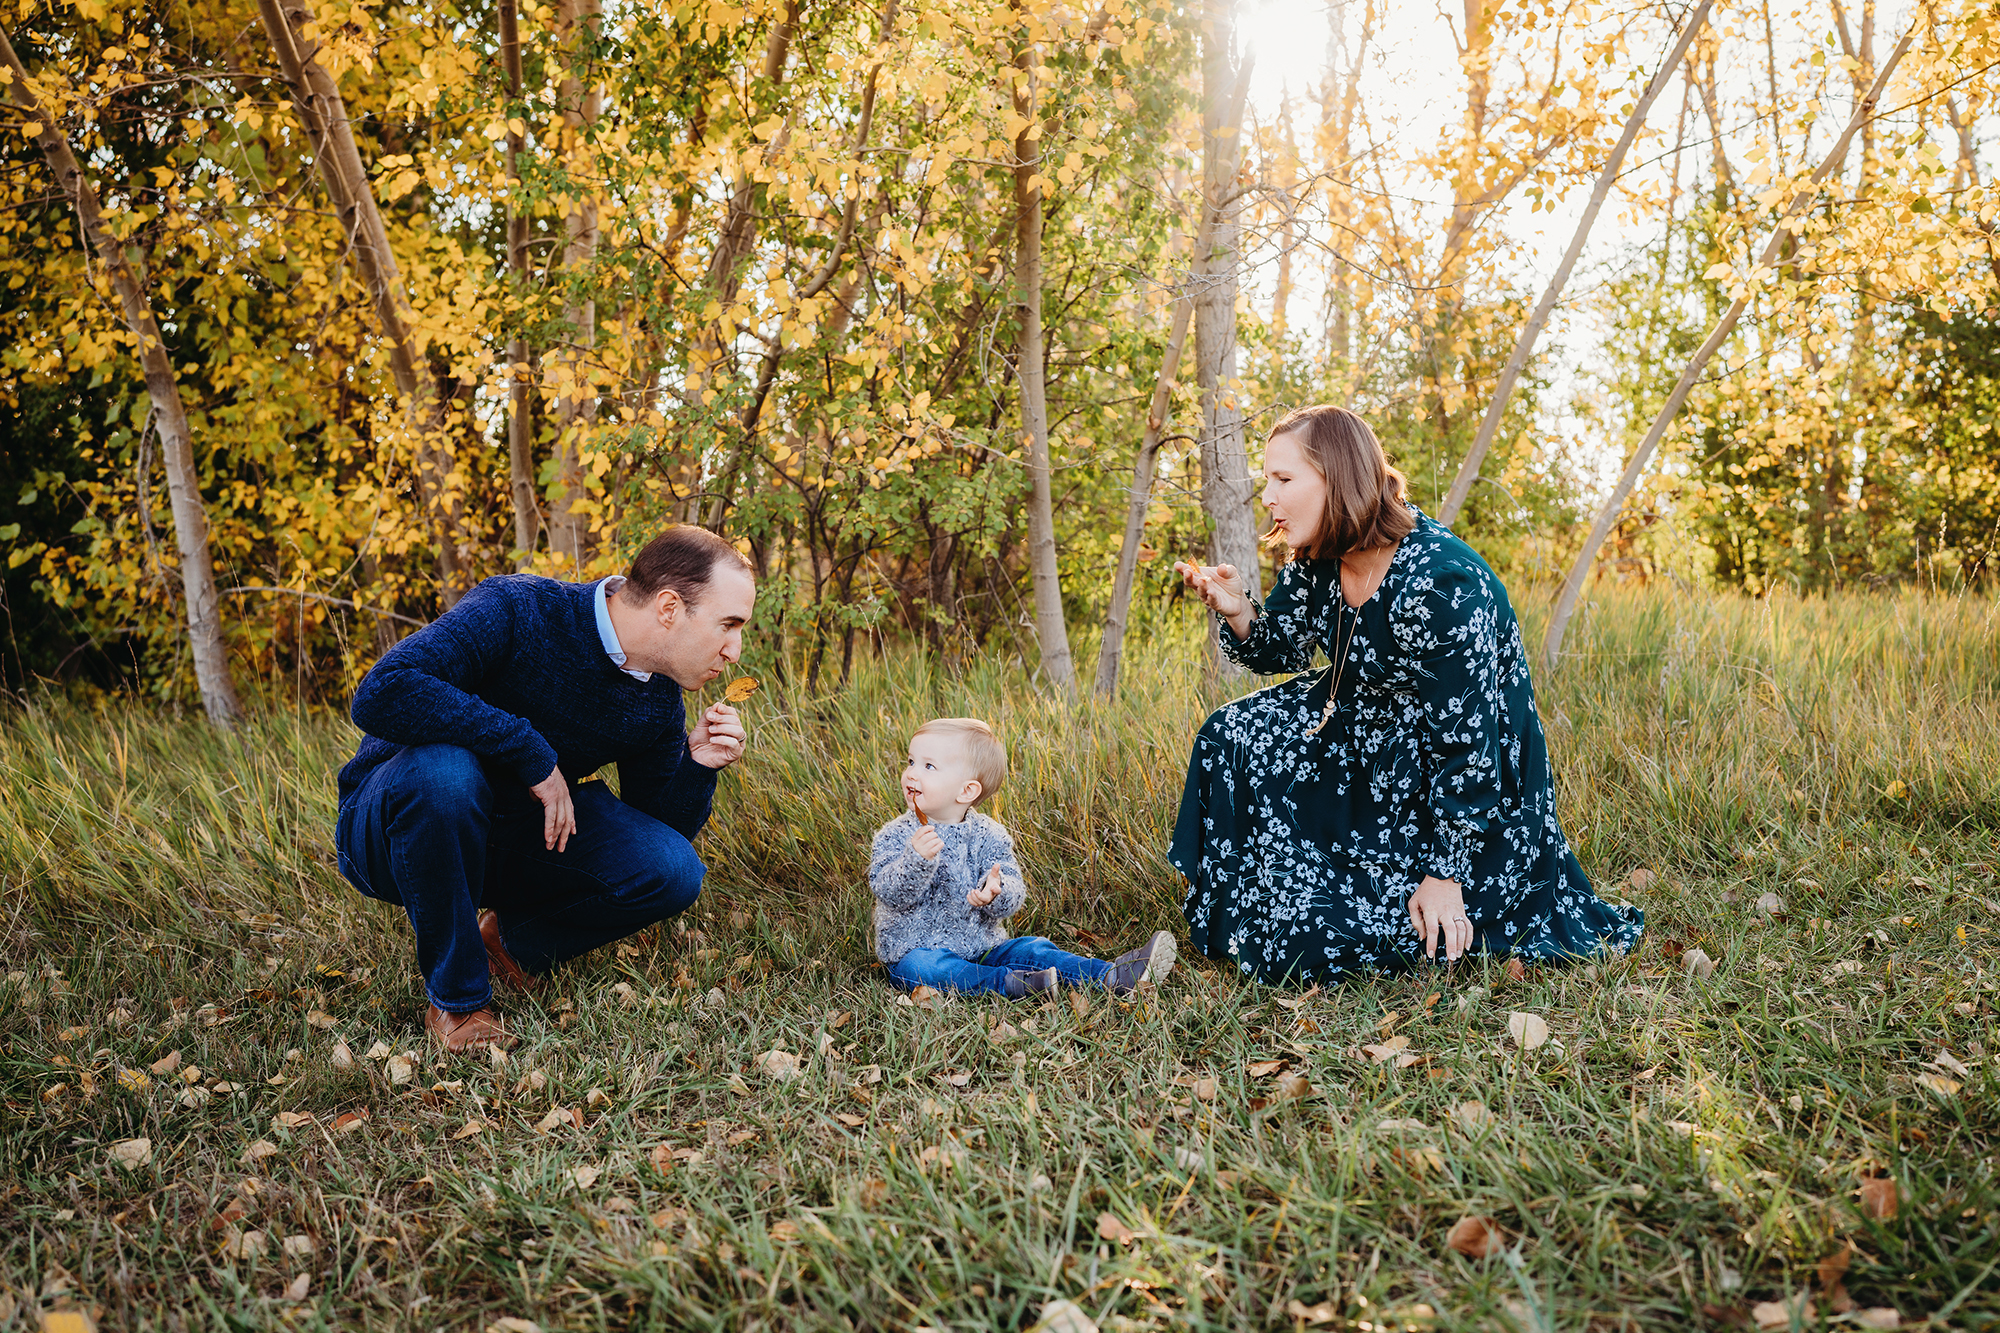 Denver family photographers capture photo of mom and dad blowing kisses at son in front of autumn leaves.